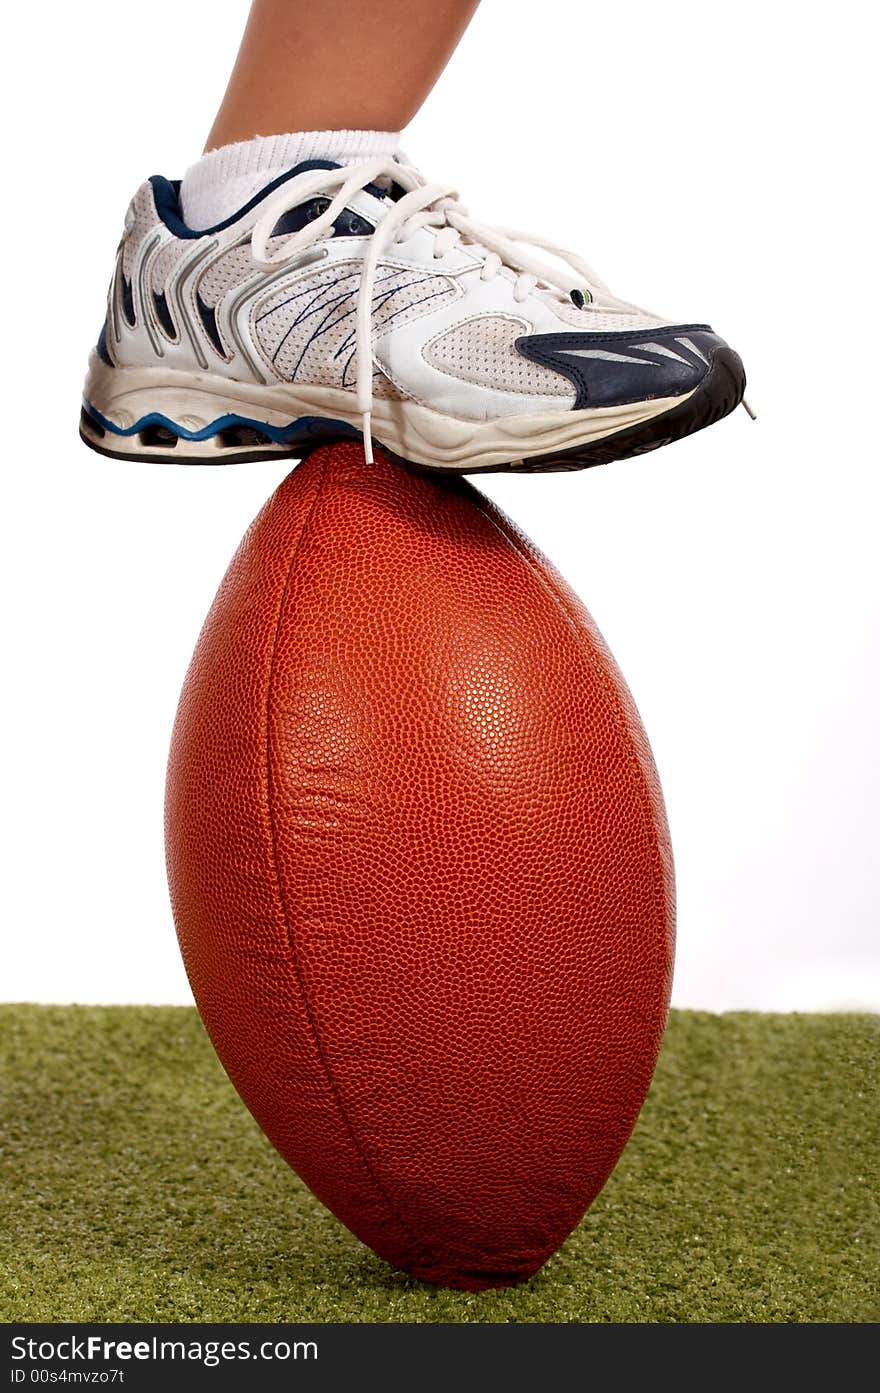 Rubber shoes stepping on a rugby ball